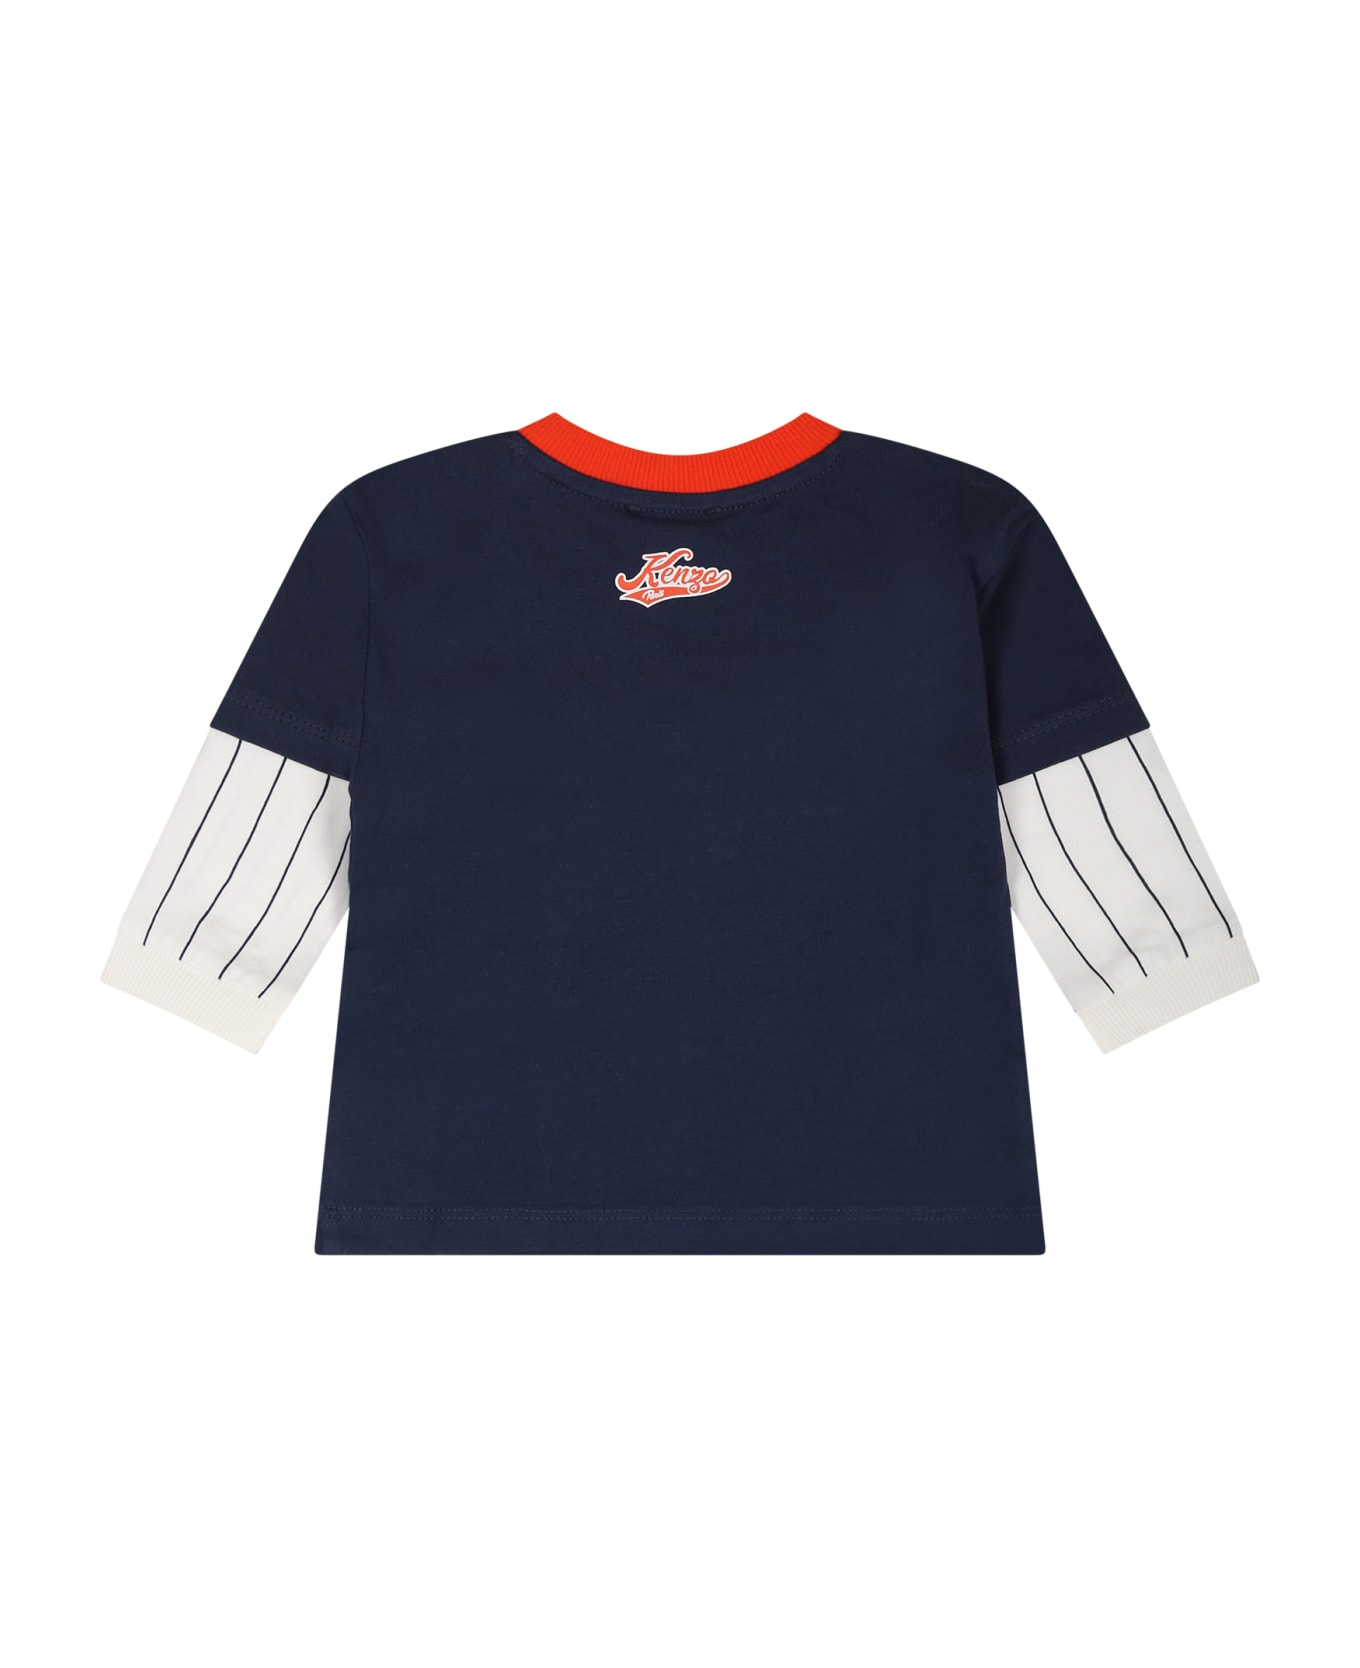 Kenzo Kids Blue T-shirt For Baby Boy With Print - Blue